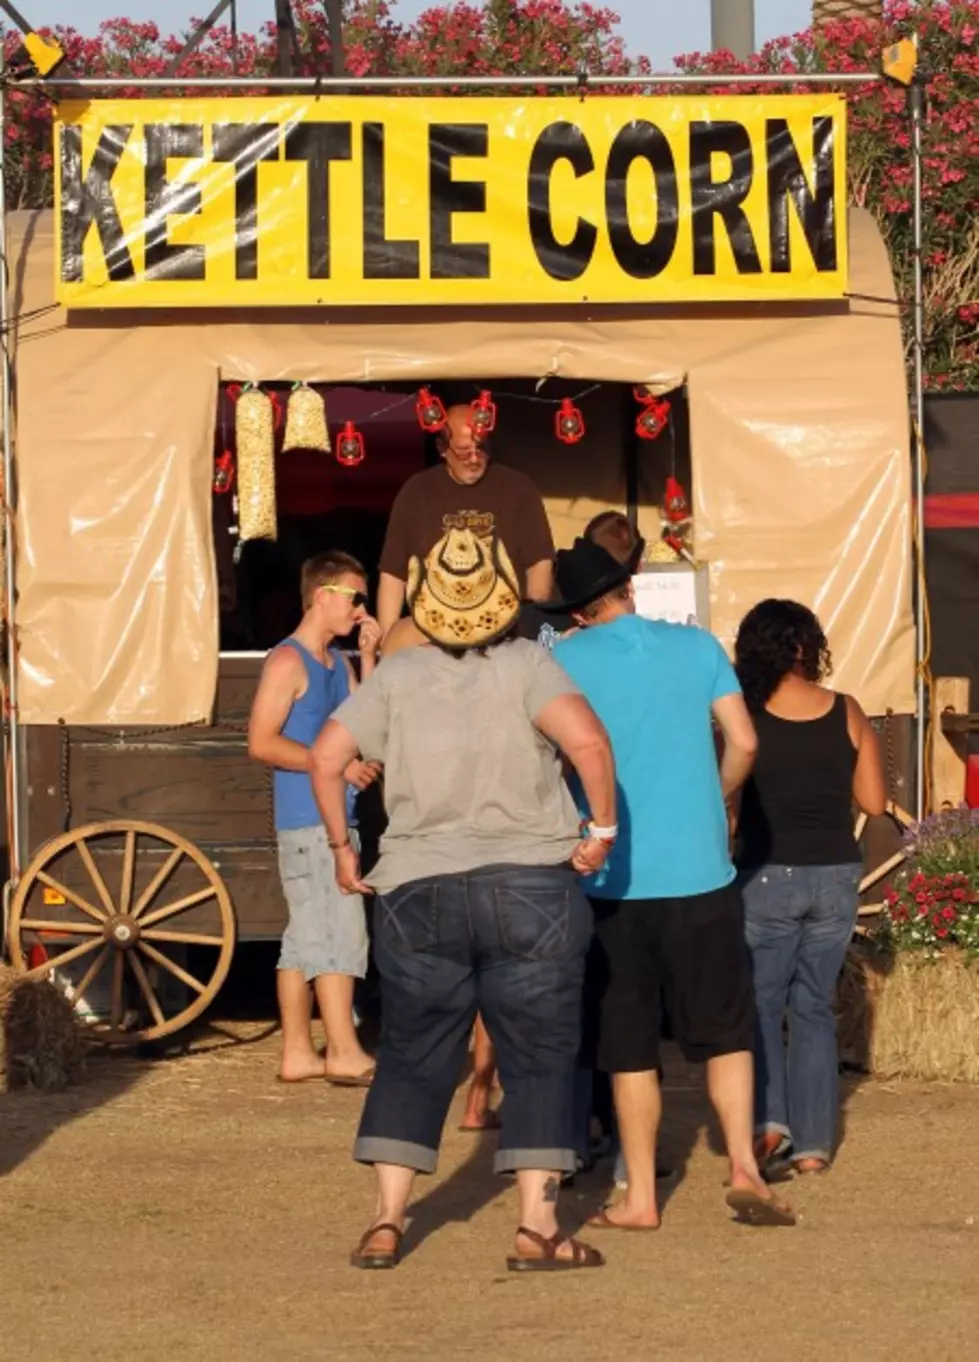 The 52nd Eden Corn Festival Runs From August 6th Through the 9th